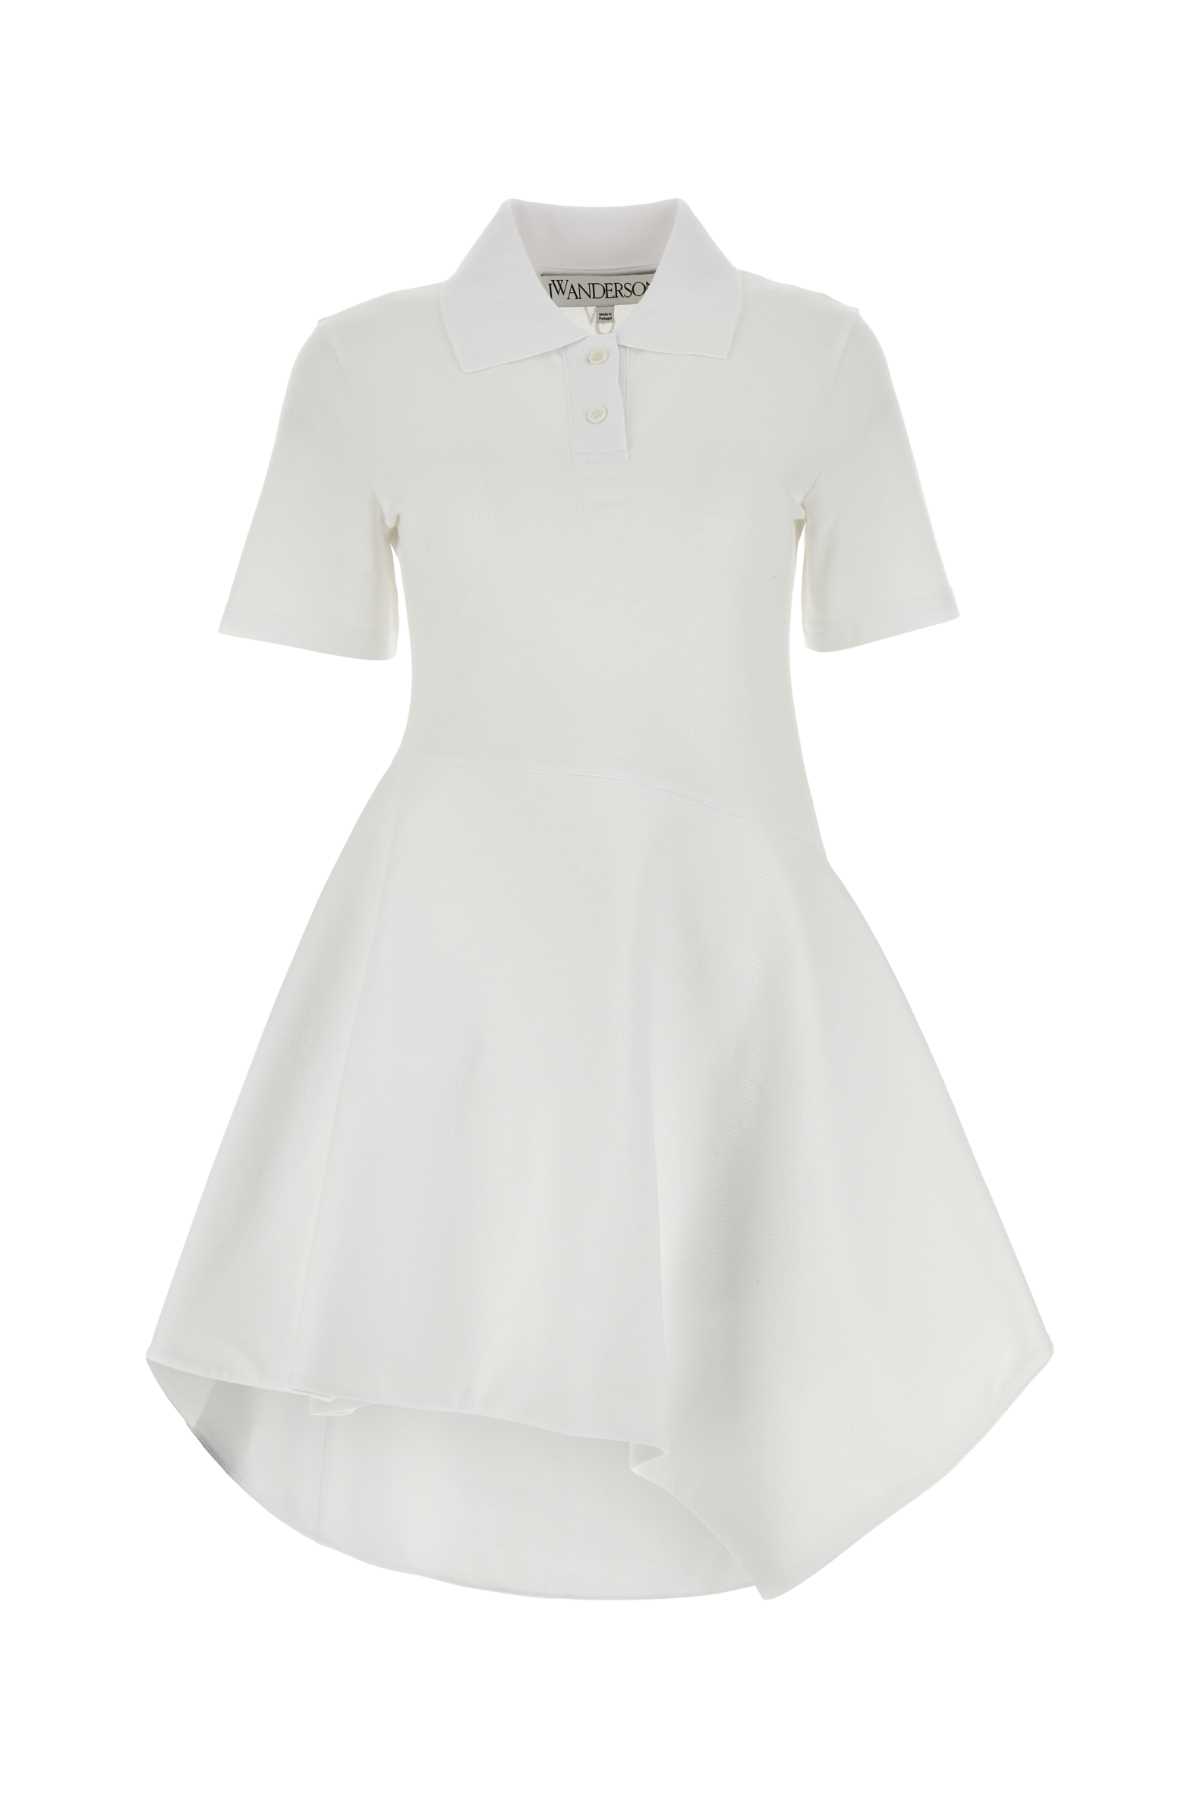 JW Anderson twisted cut-out shirt dress - White